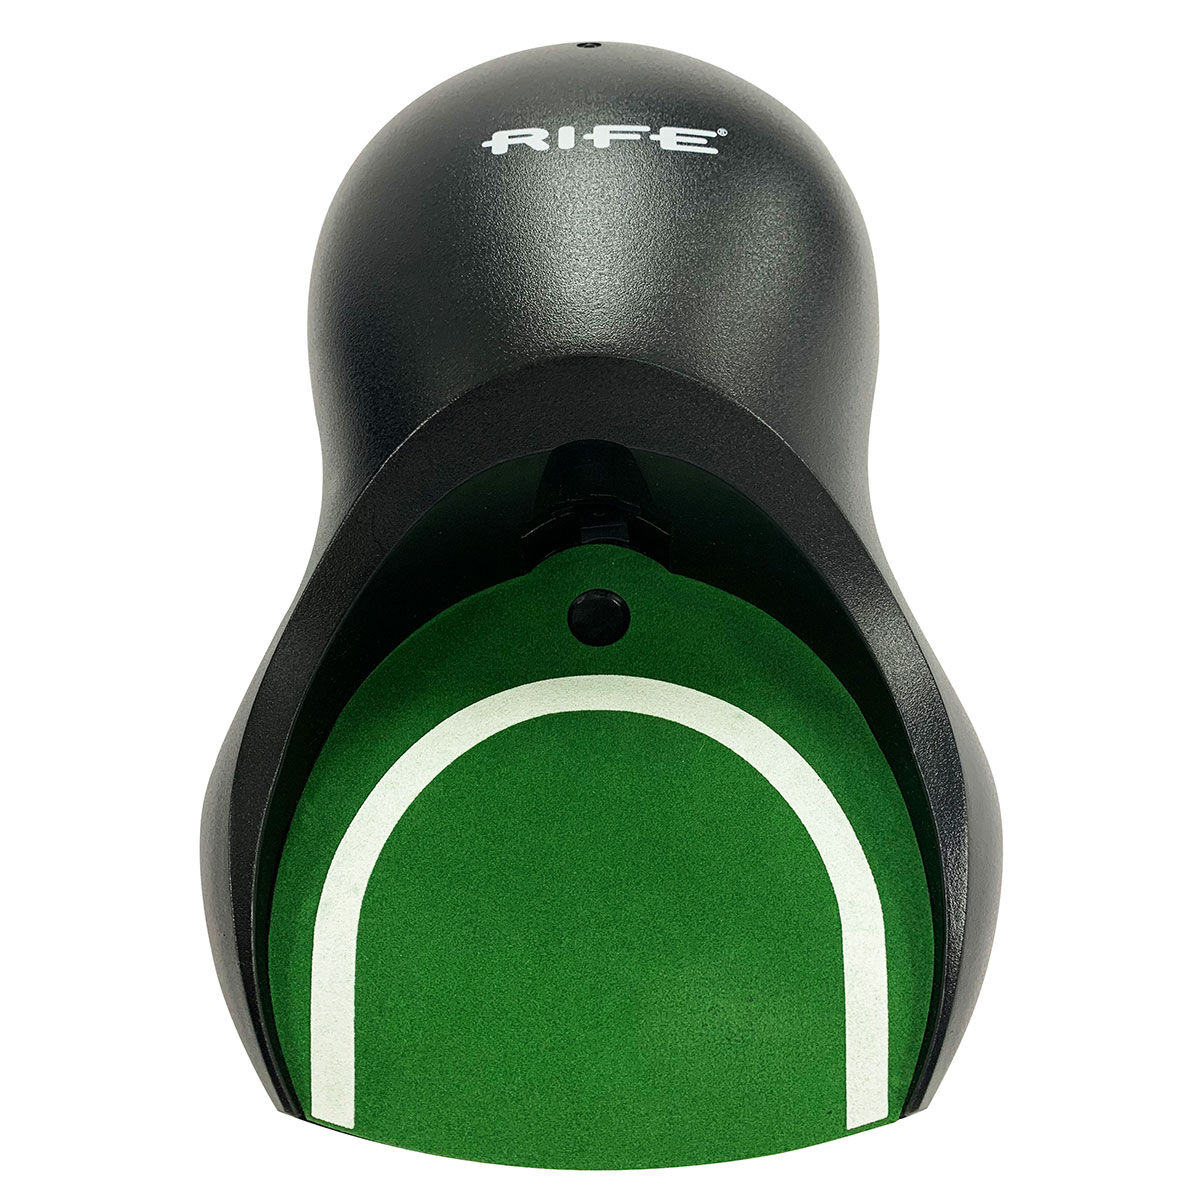 Rife Training Aids, Electric Golf Putting Cup, Mens, Black | American Golf, One Size von Rife